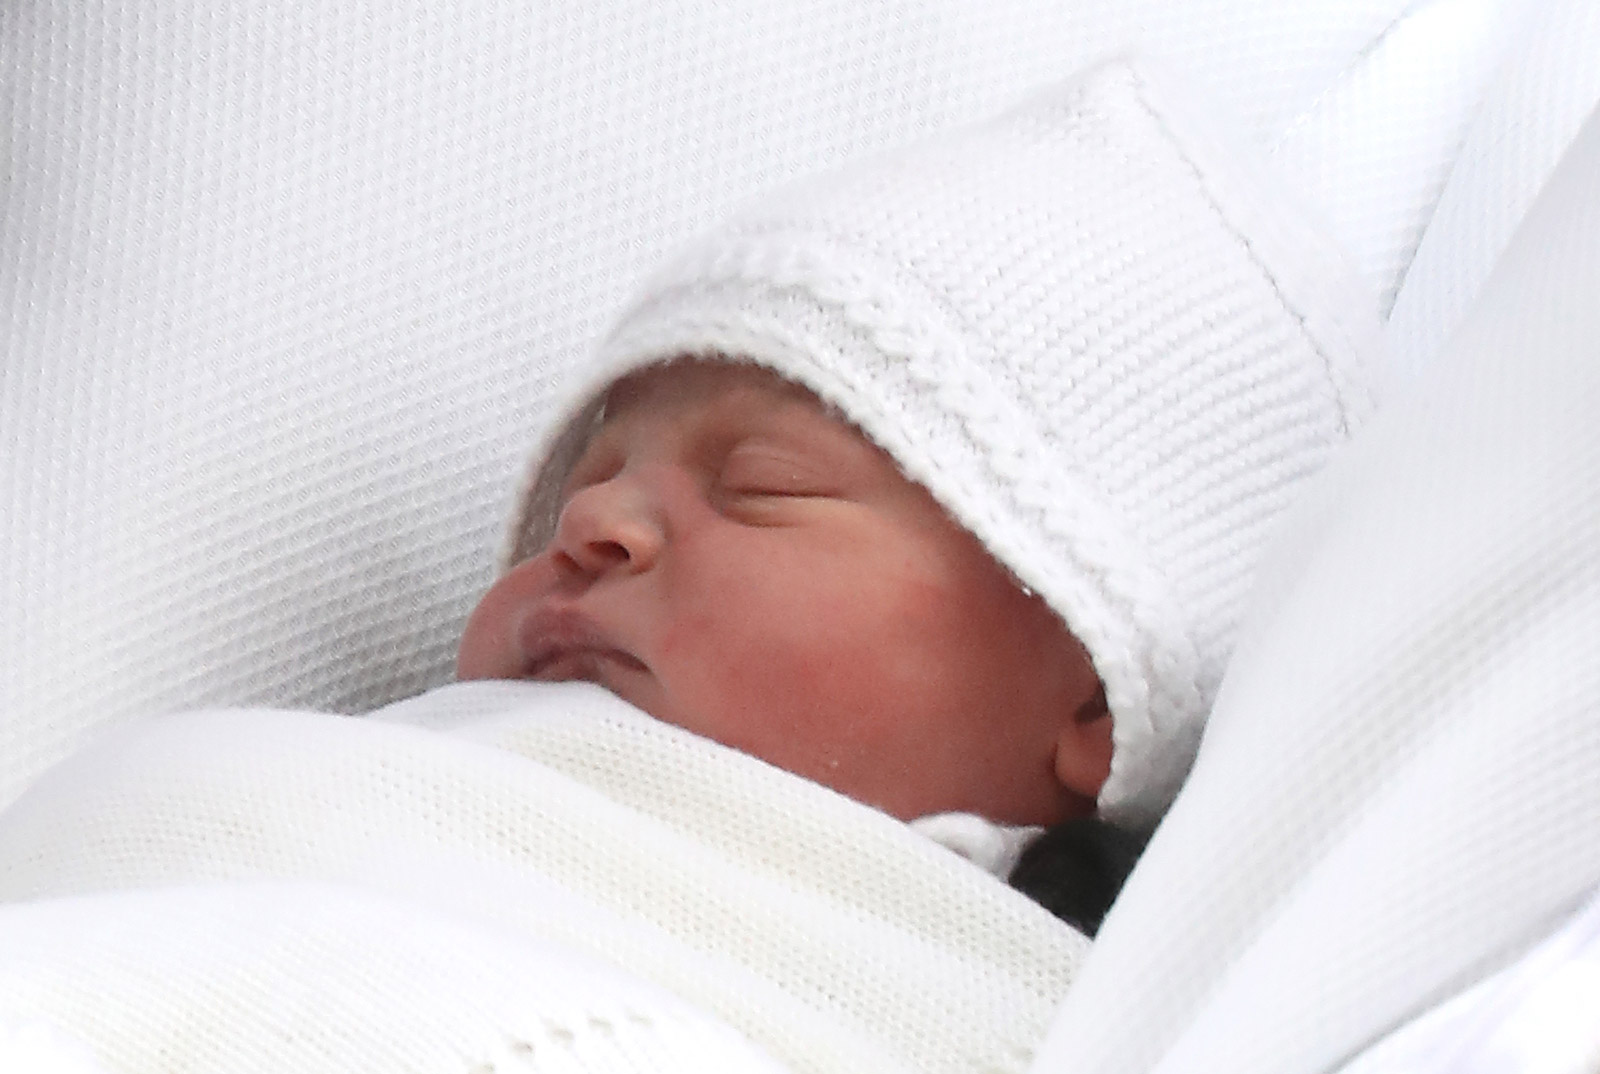 Its a boy! Photos of the new royal baby